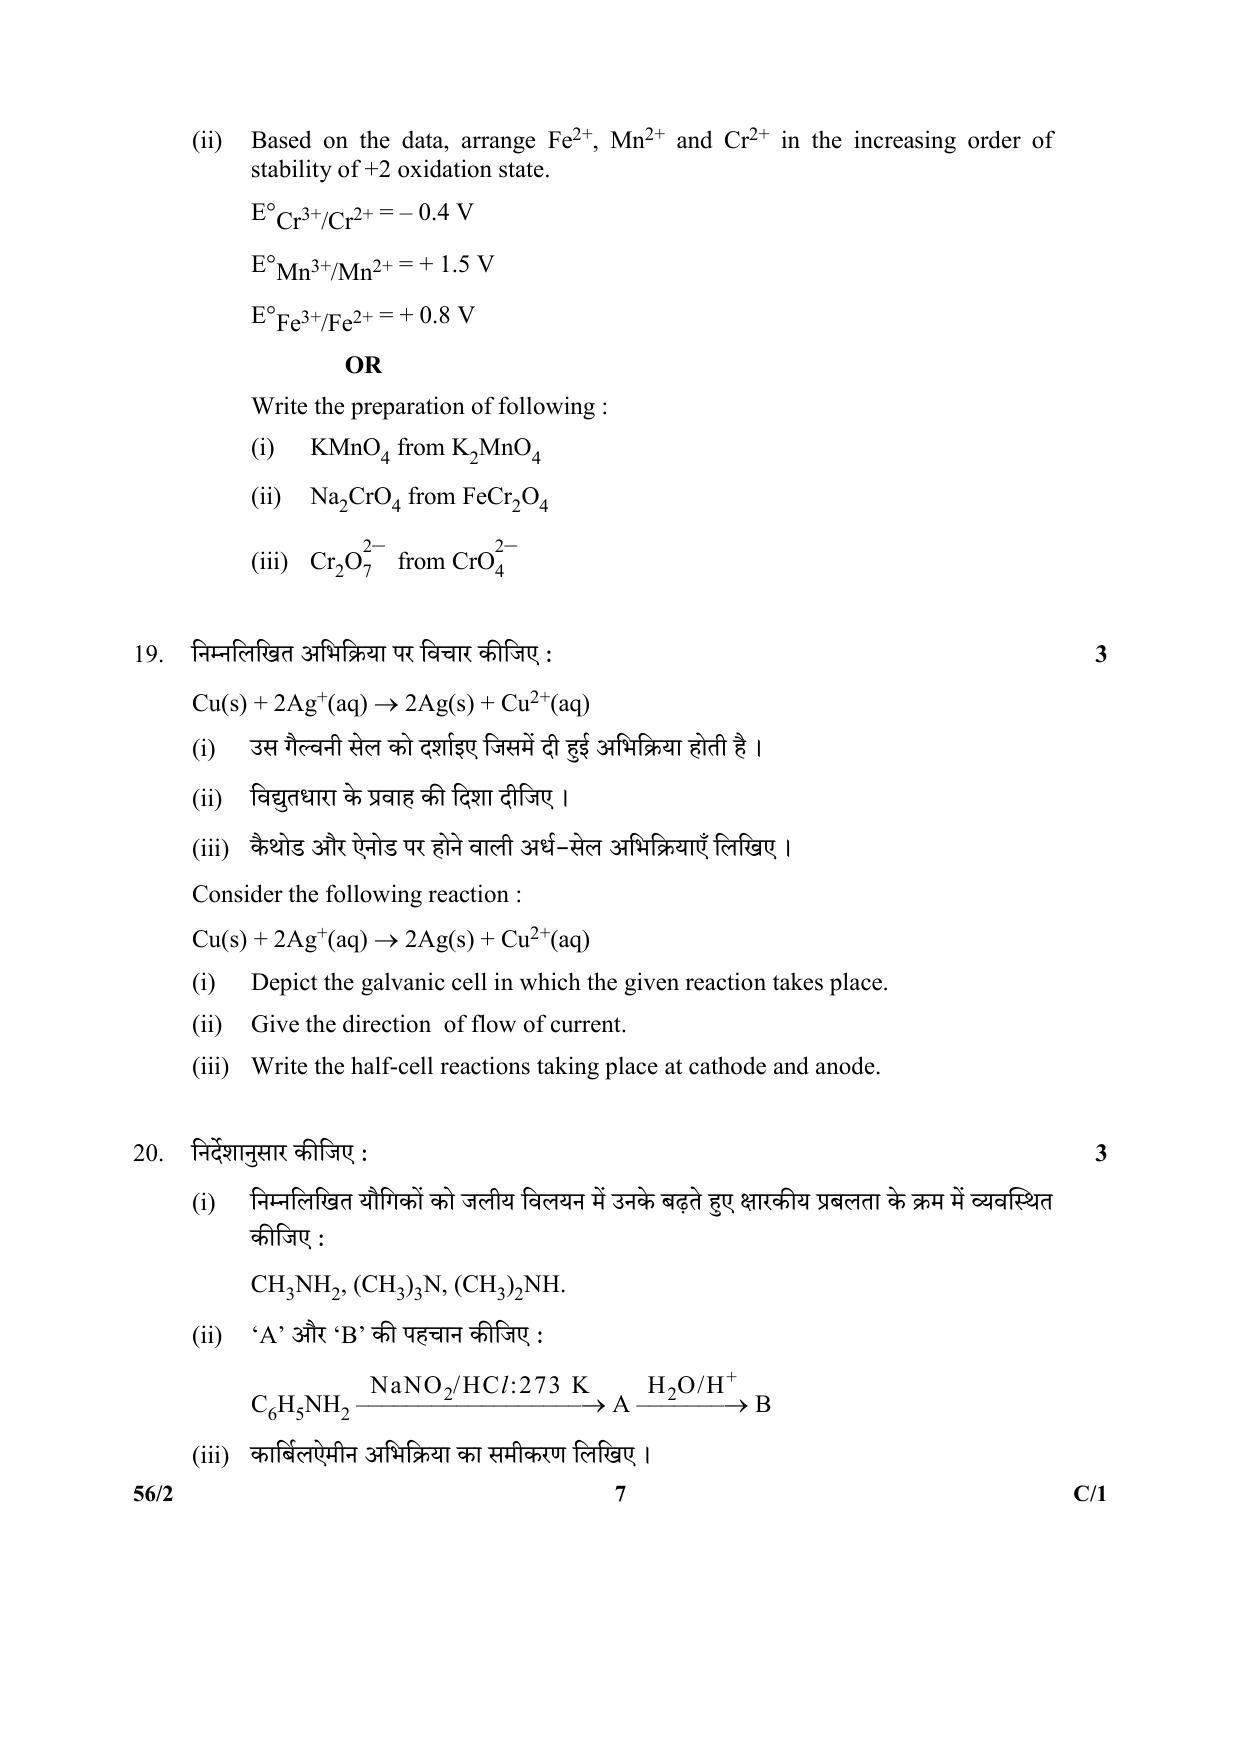 CBSE Class 12 56-2 (Chemistry) 2018 Compartment Question Paper - Page 7